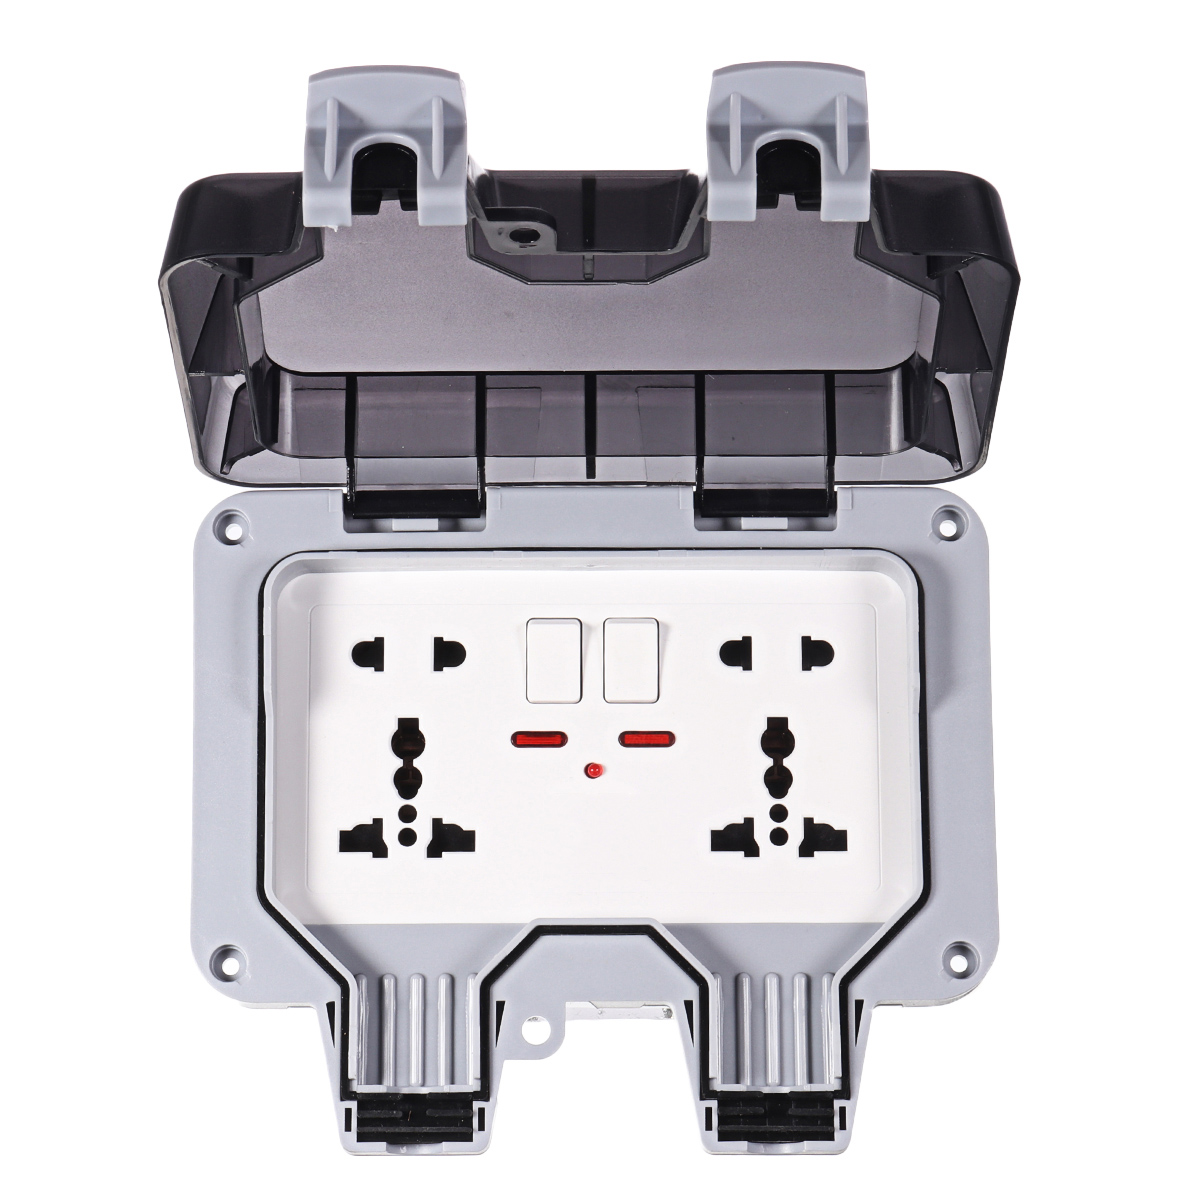 Find IP66 Weatherproof Outdoor BOX Wall Socket 13A Double Universal / UK Switched Outlet With USB Charging Port for Sale on Gipsybee.com with cryptocurrencies